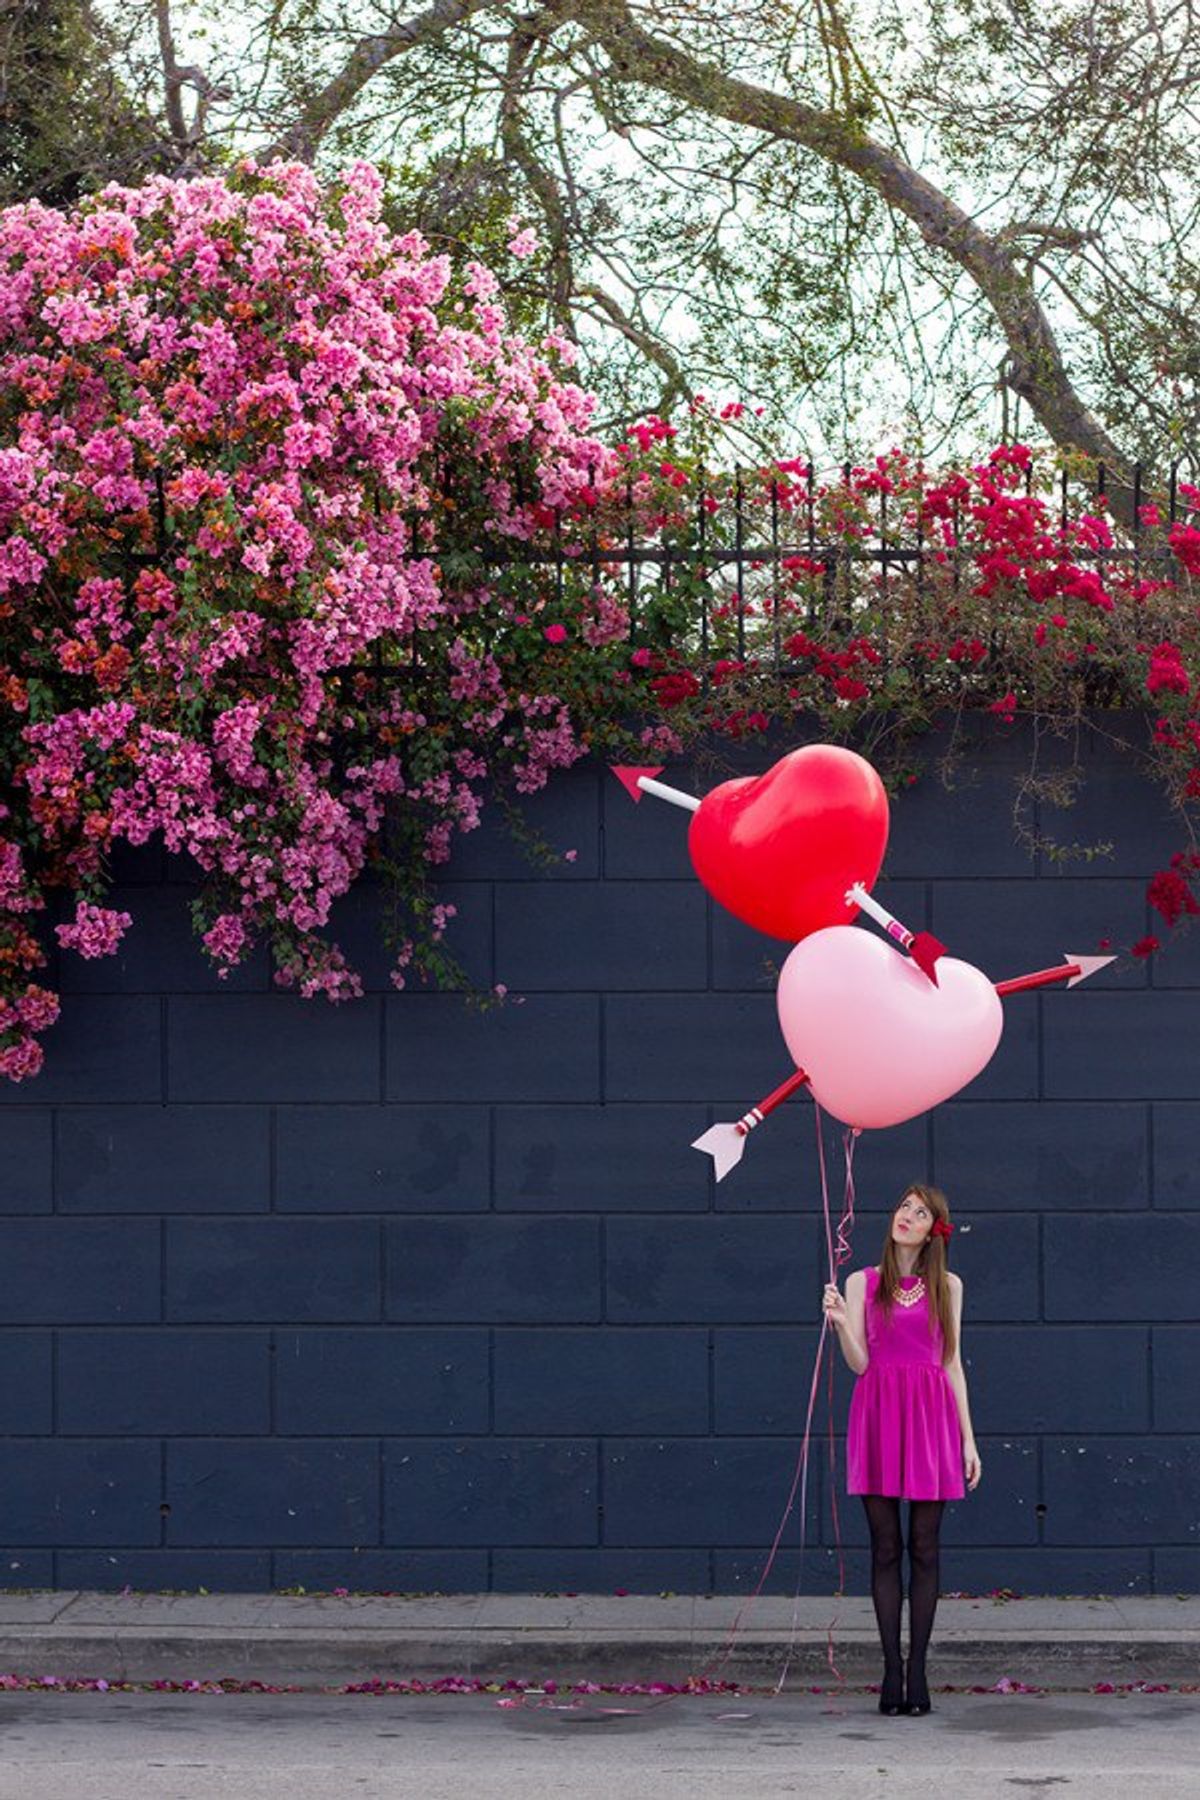 11 Things To Do As A Single College Student On Valentine's Day